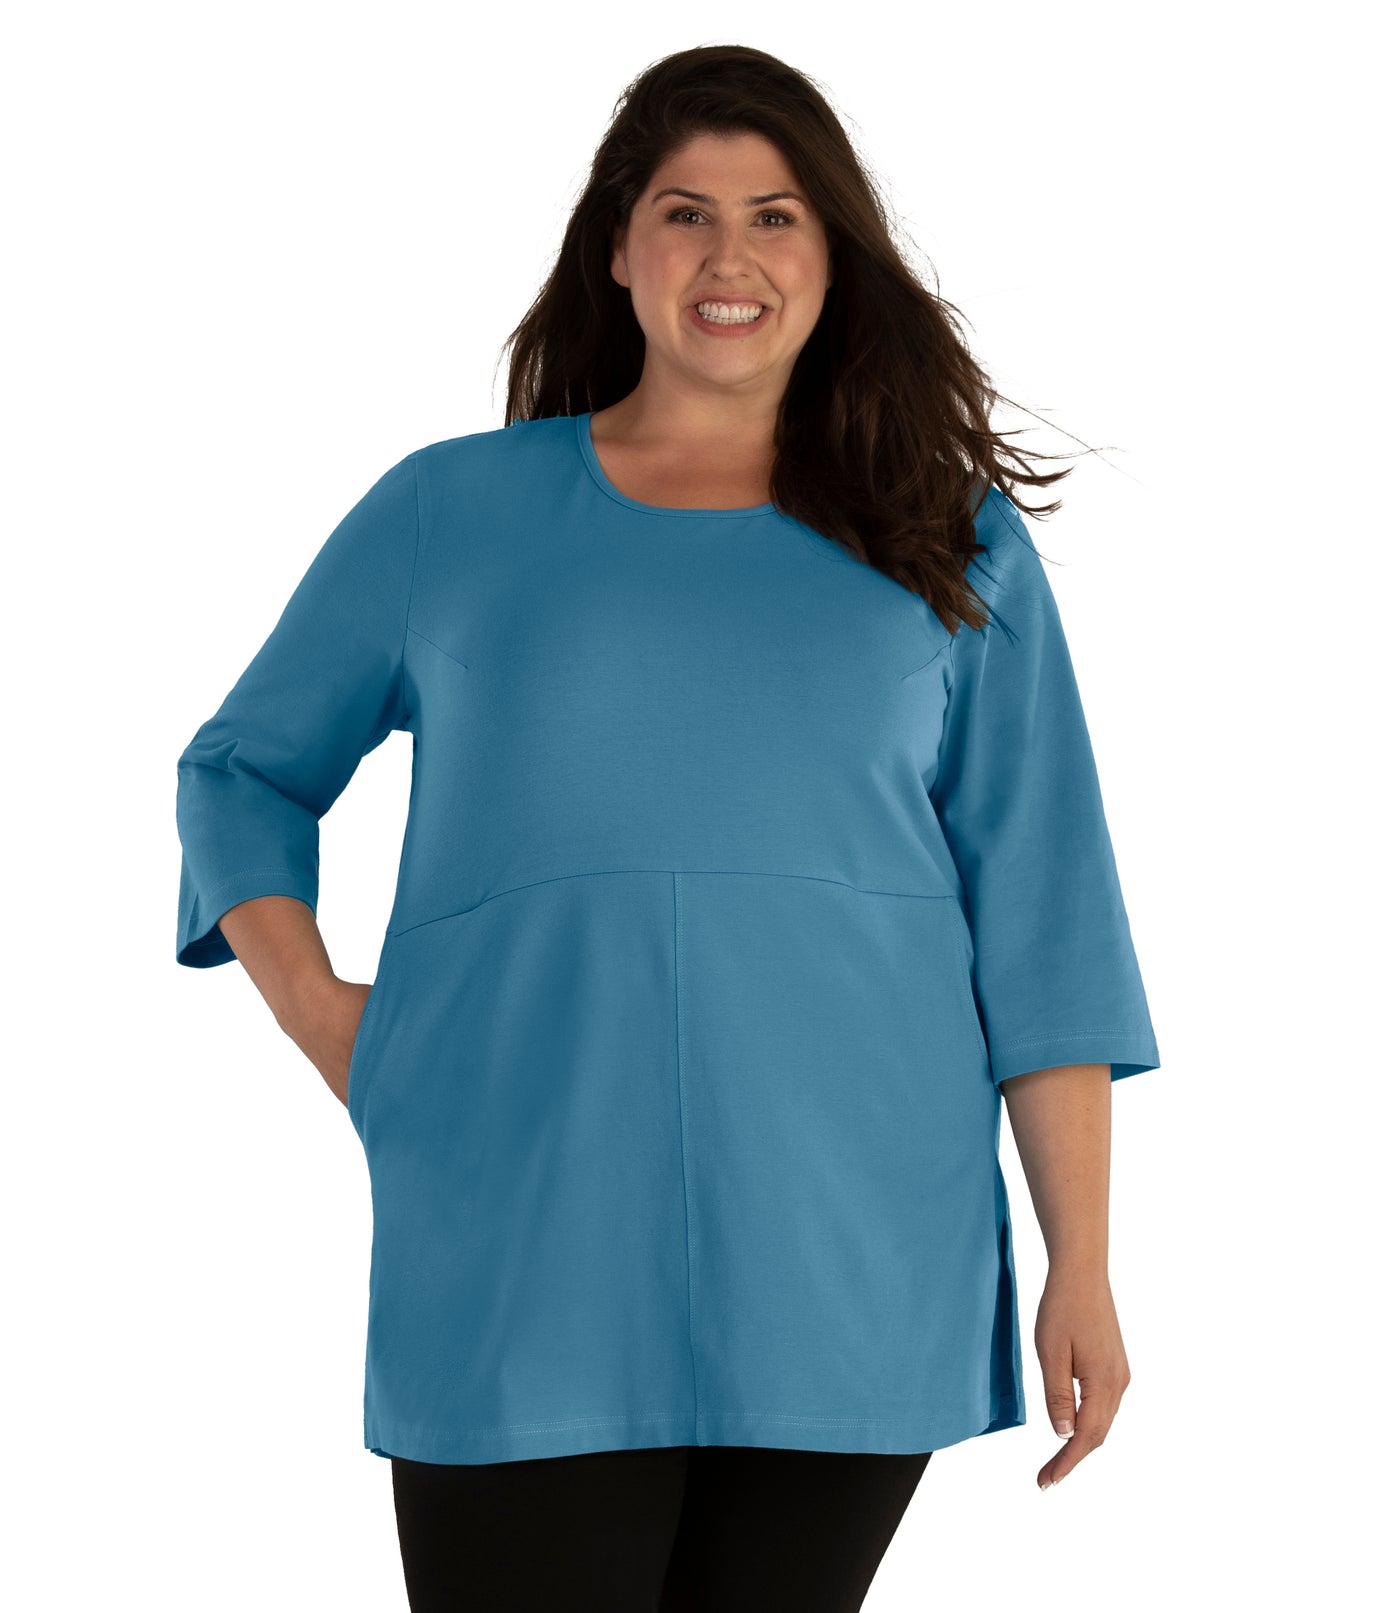 Plus size woman, facing front, wearing JunoActive plus size Stretch Naturals Empire Tunic with Pockets in the color Dusty Teal. Her left hand is in the tunic pocket at her waist level. She is wearing JunoActive Plus Size Leggings in the color Black.